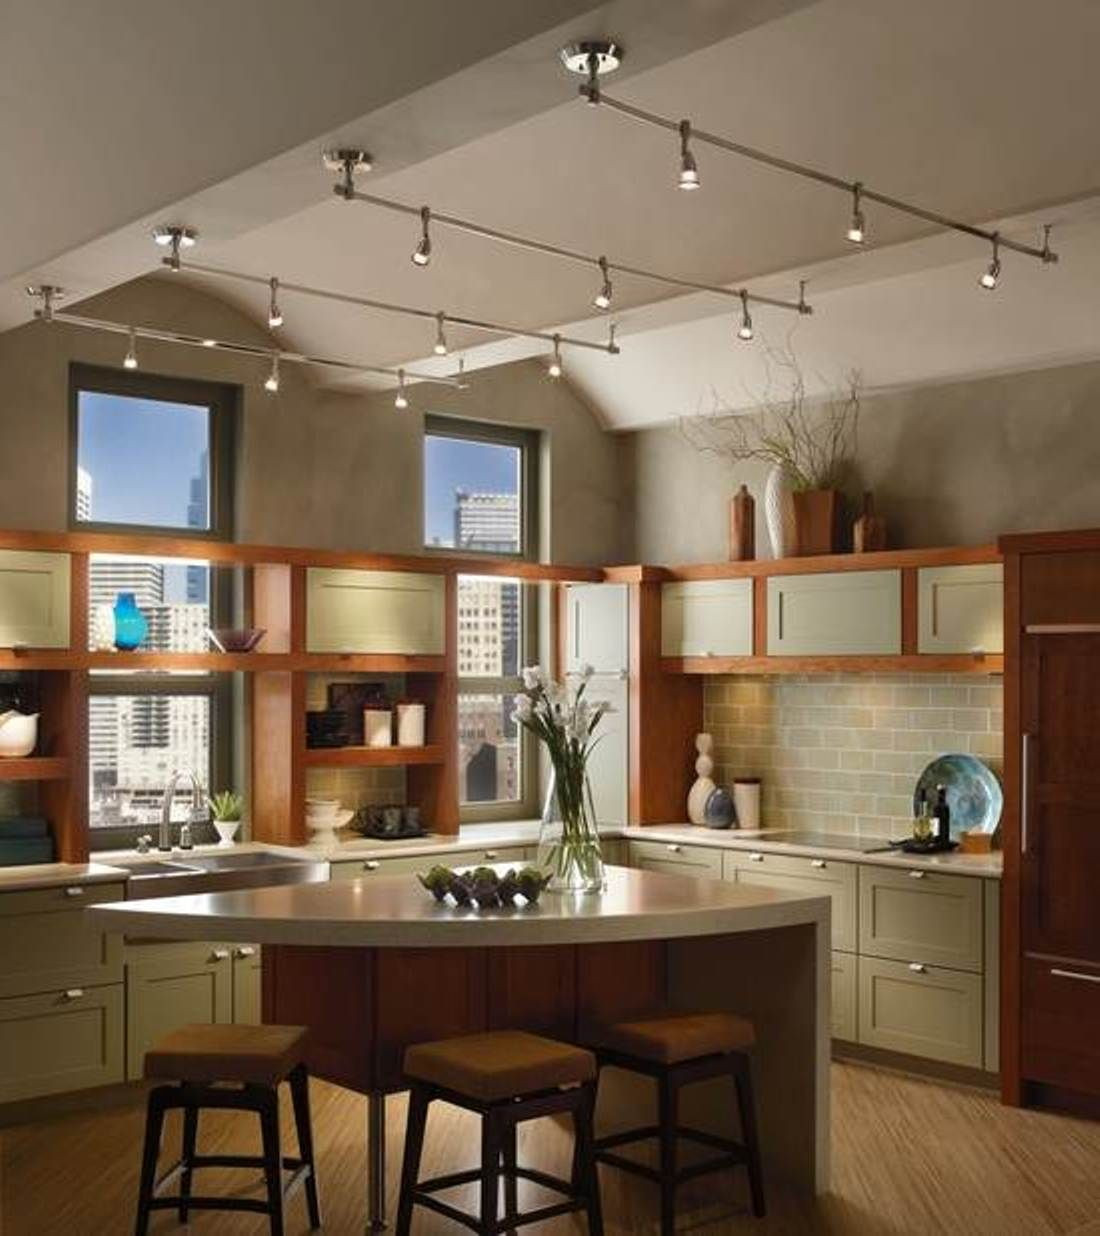 Tracking Lights For Kitchen
 The 25 best Kitchen track lighting ideas on Pinterest